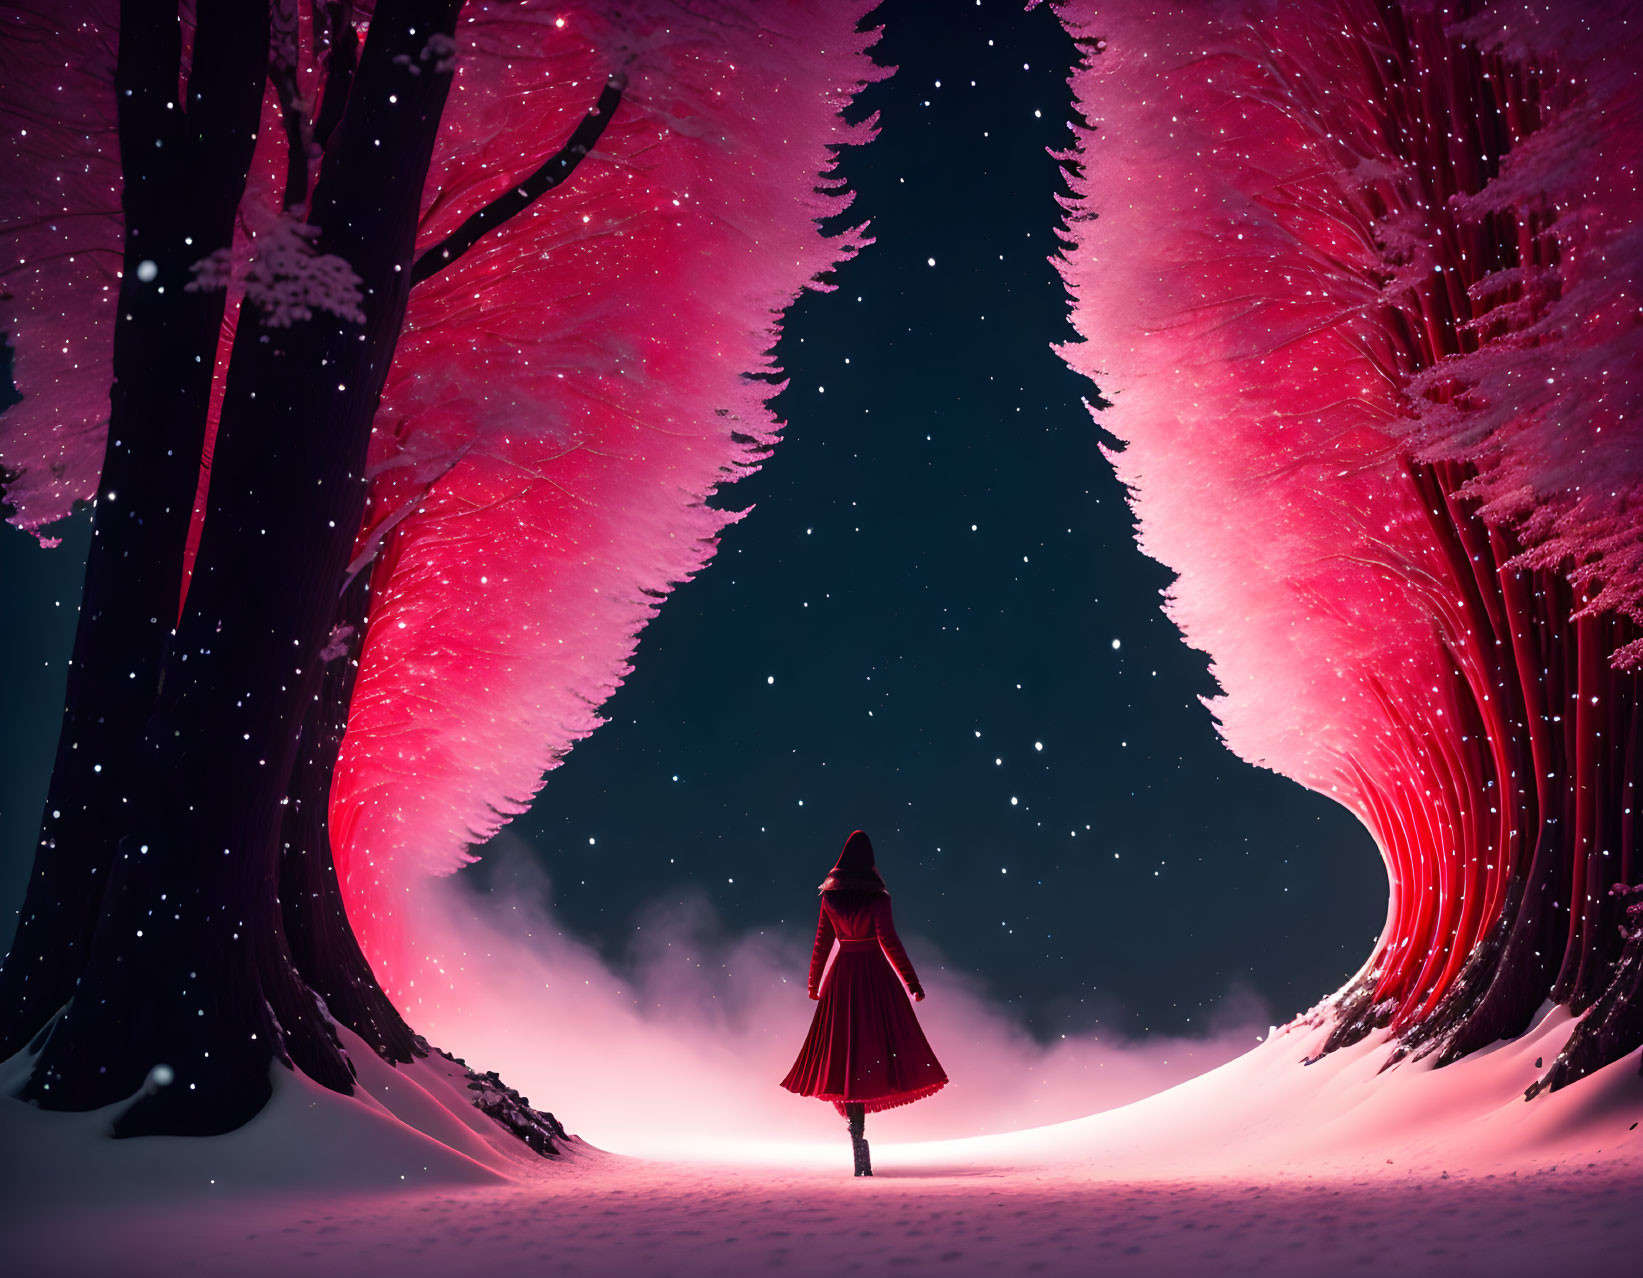 Solitary figure in red cloak among snow-covered trees at night